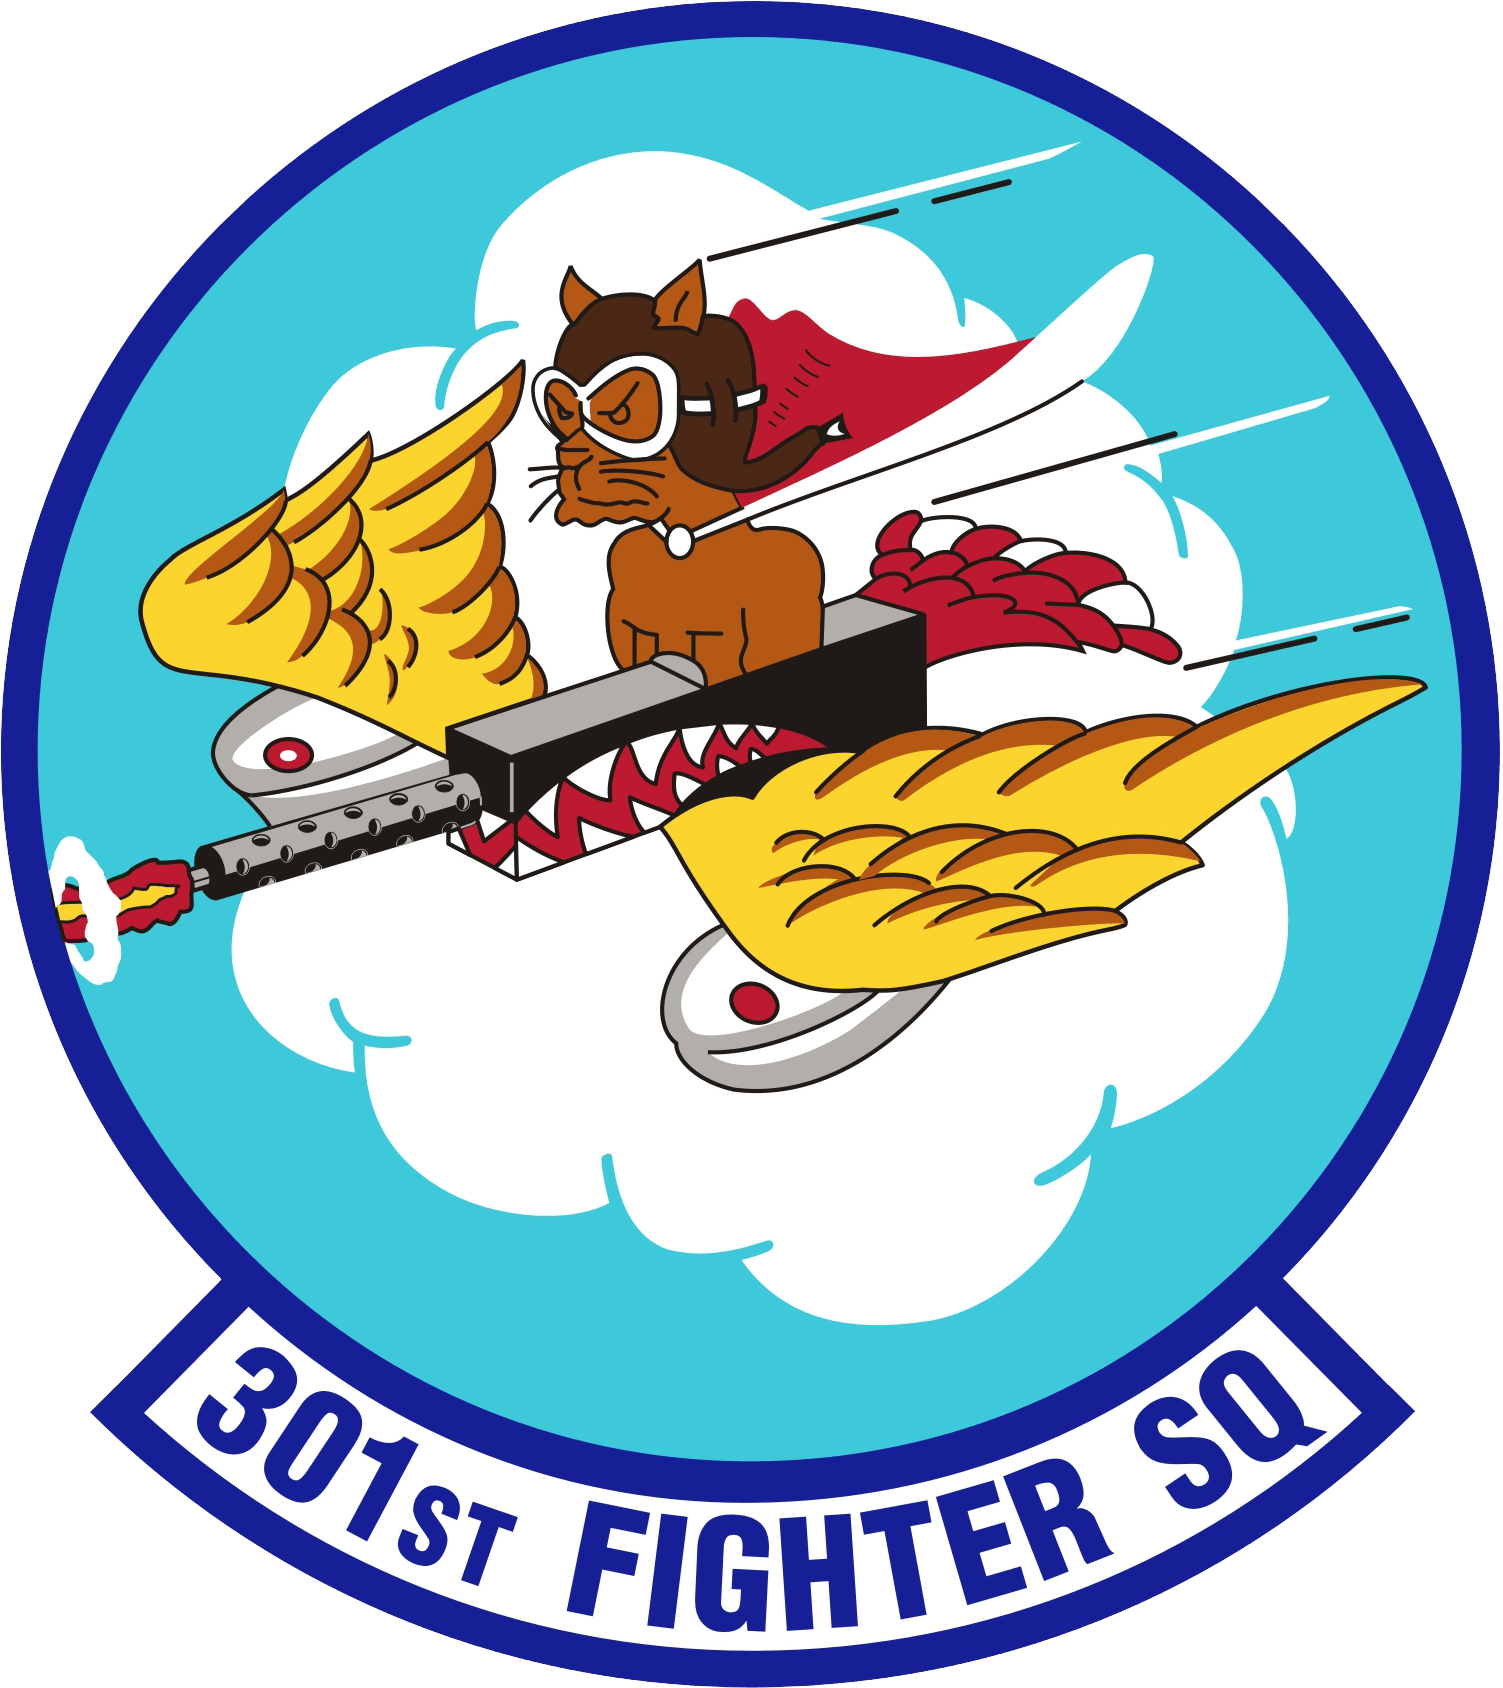 AETC Logo - File:301st Fighter Squadron - AETC - Emblem.png - Wikimedia Commons